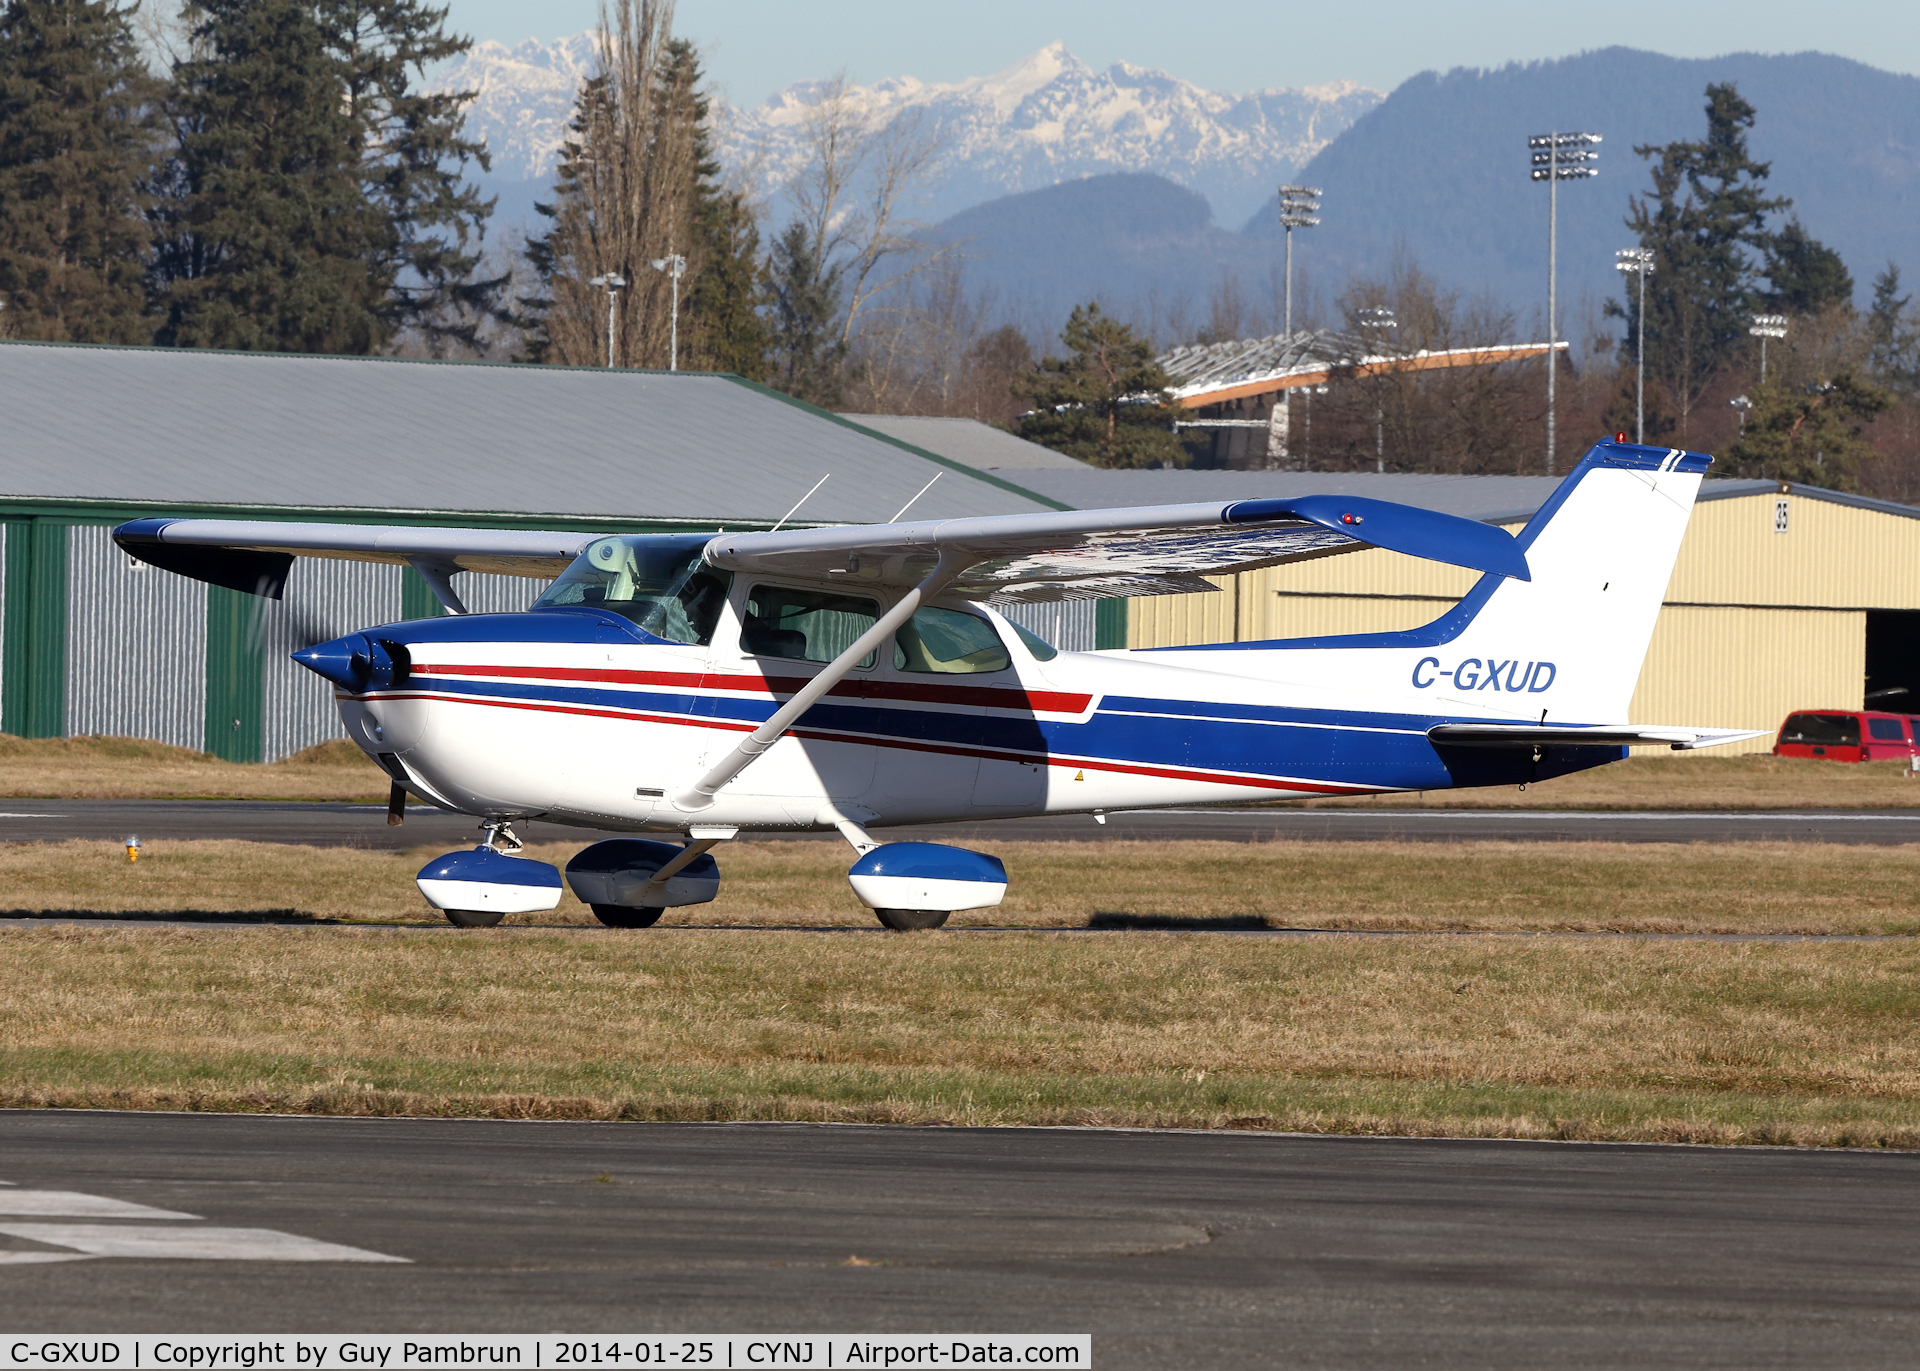 C-GXUD, 1974 Cessna 172M C/N 17262500, Ready to depart on a beautiful clear BC day